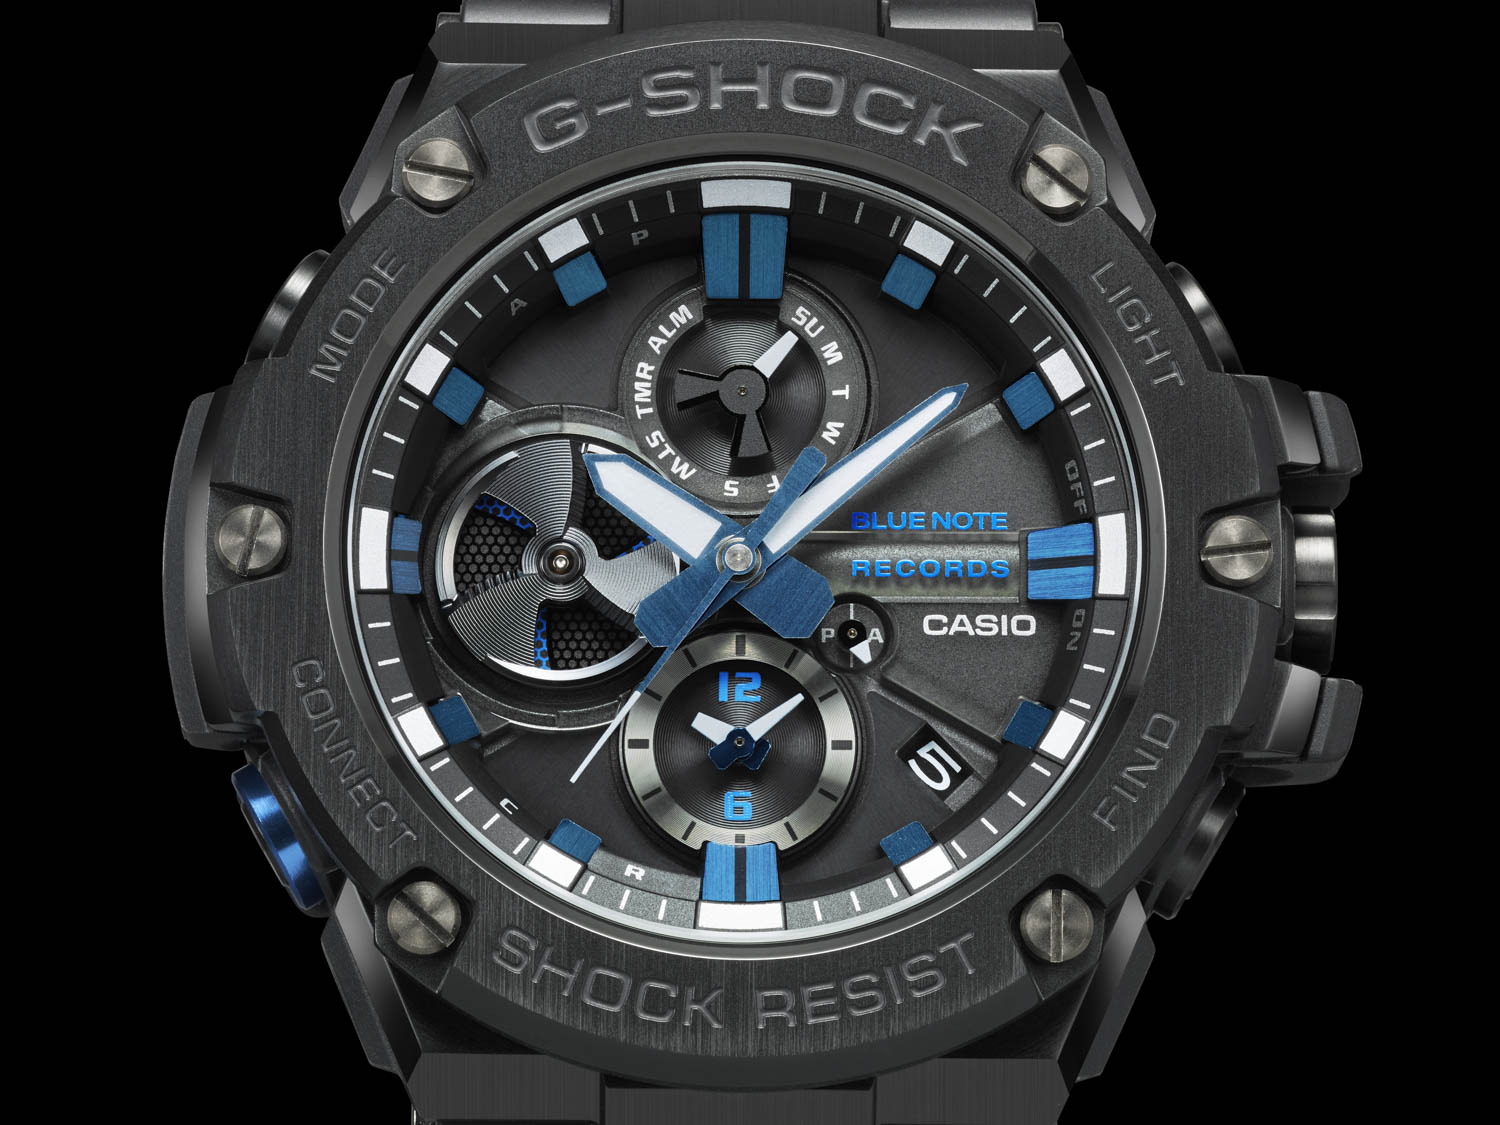 Frontal View of G-Shock X Blue Note Records